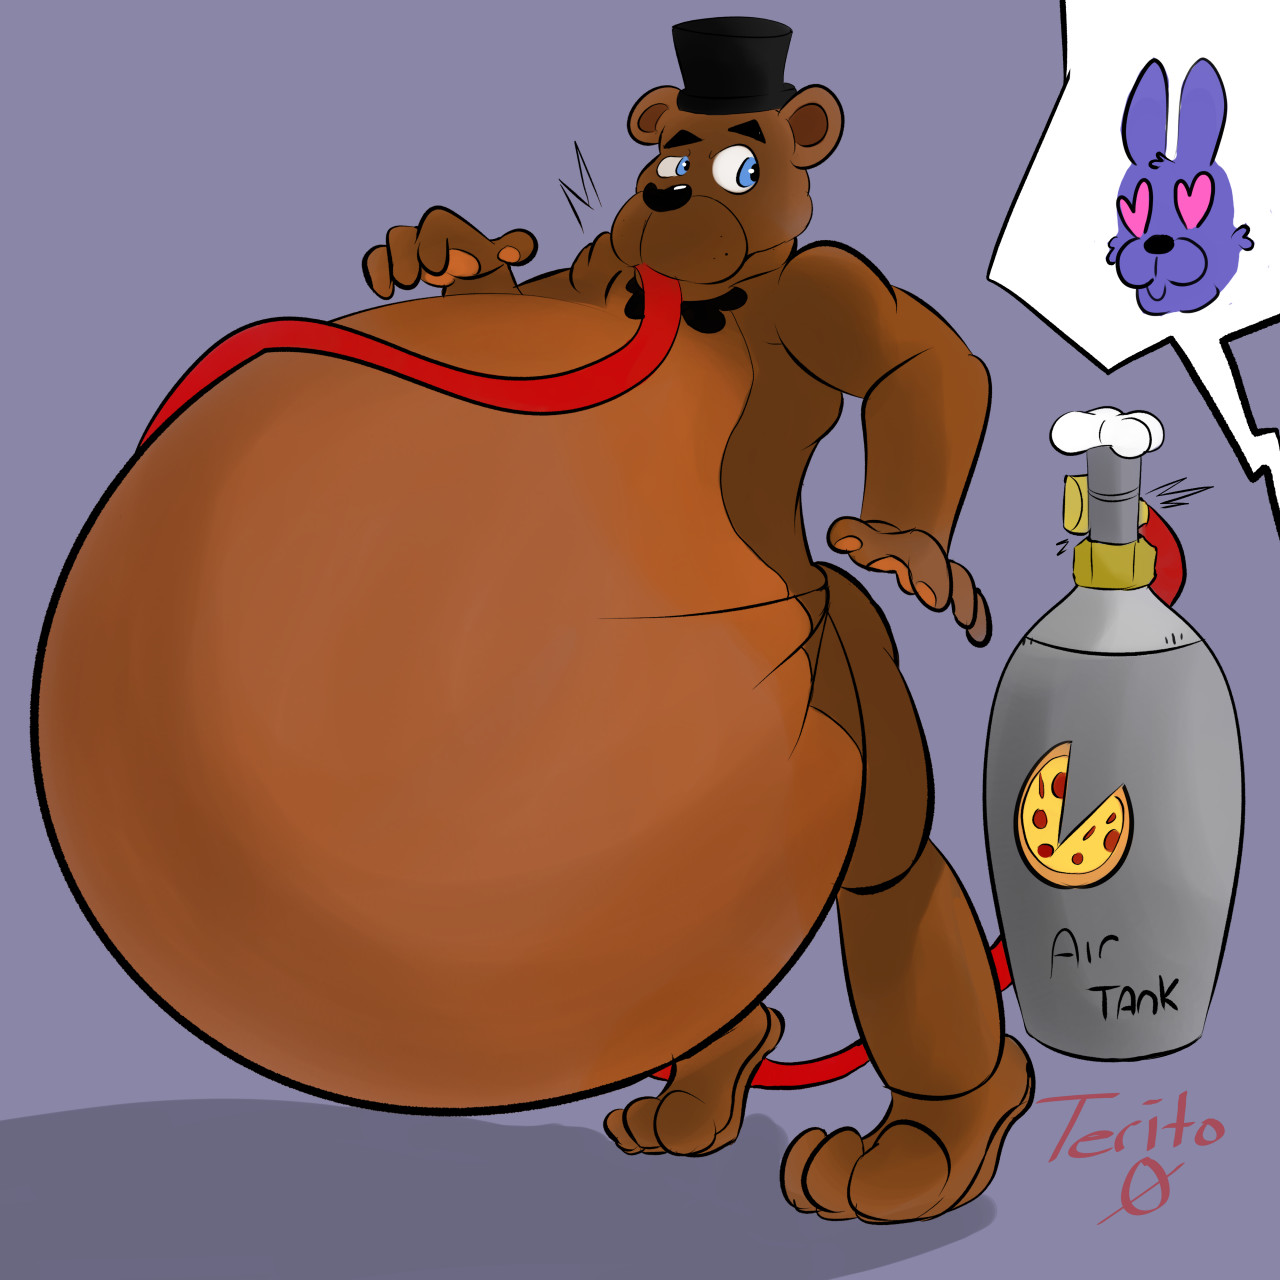 Five nights at freddys inflation